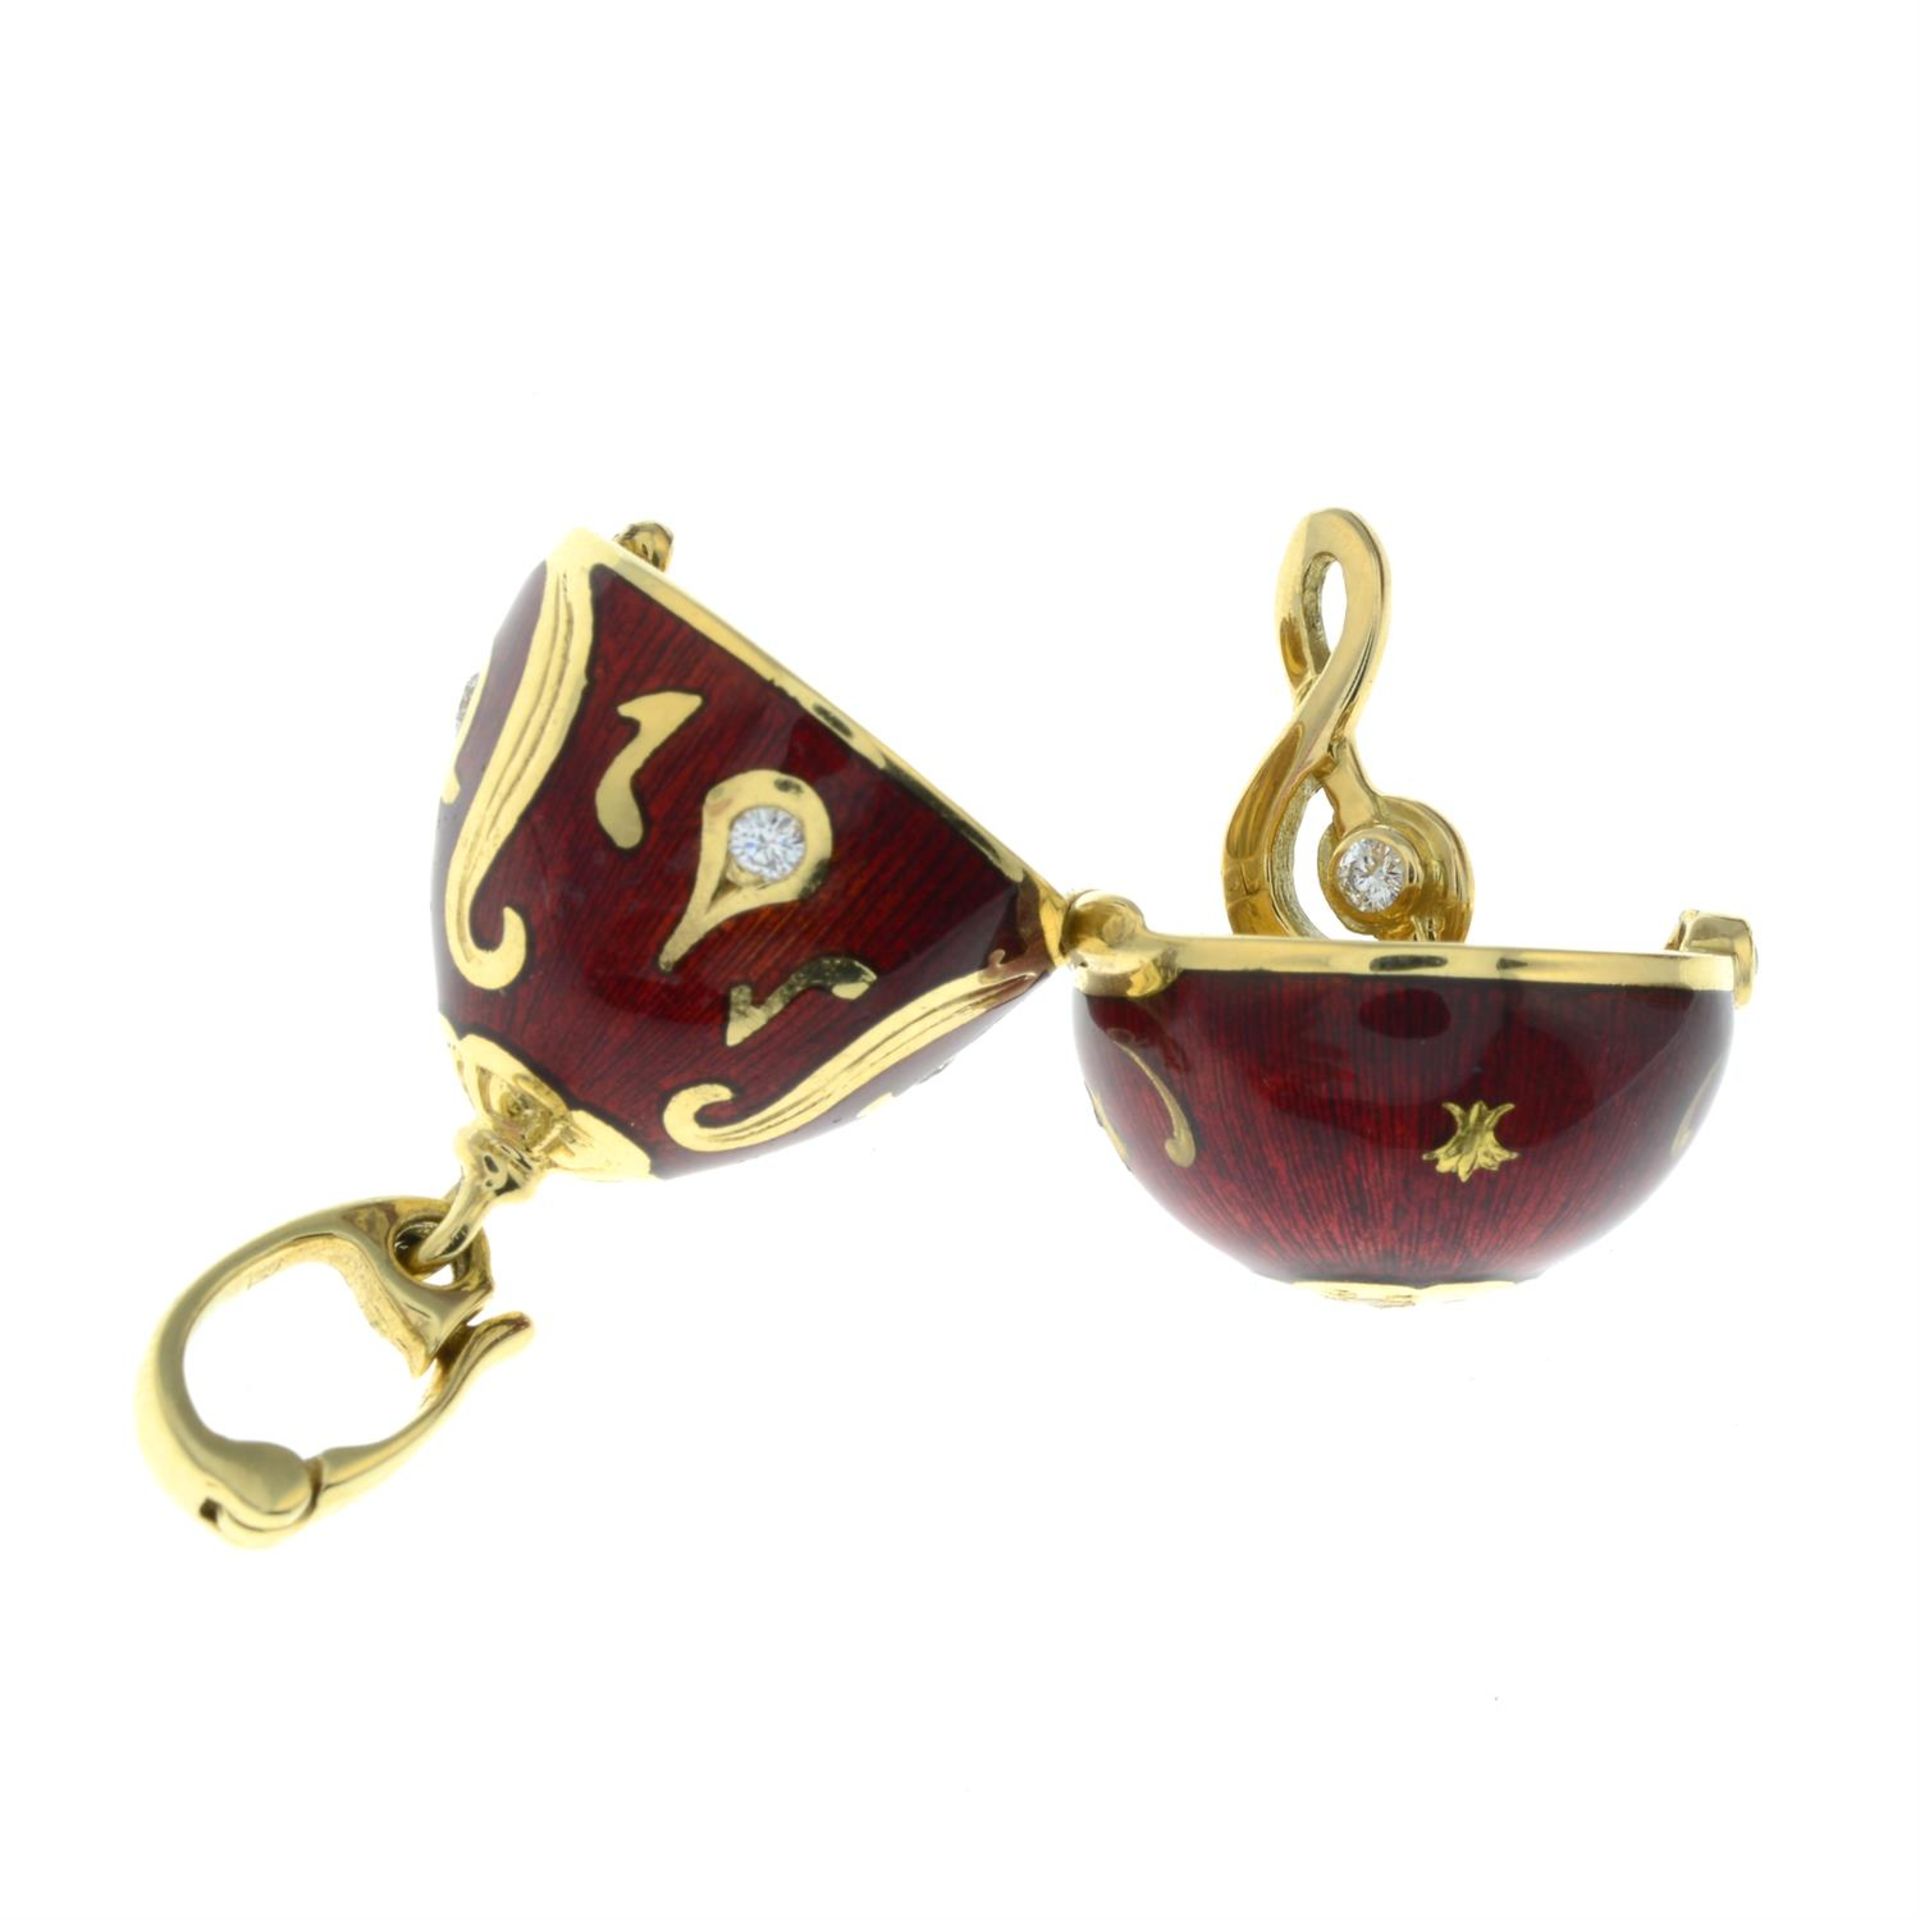 A limited edition 18ct gold diamond and red enamel hinged egg pendant, containing a treble clef, - Image 4 of 5